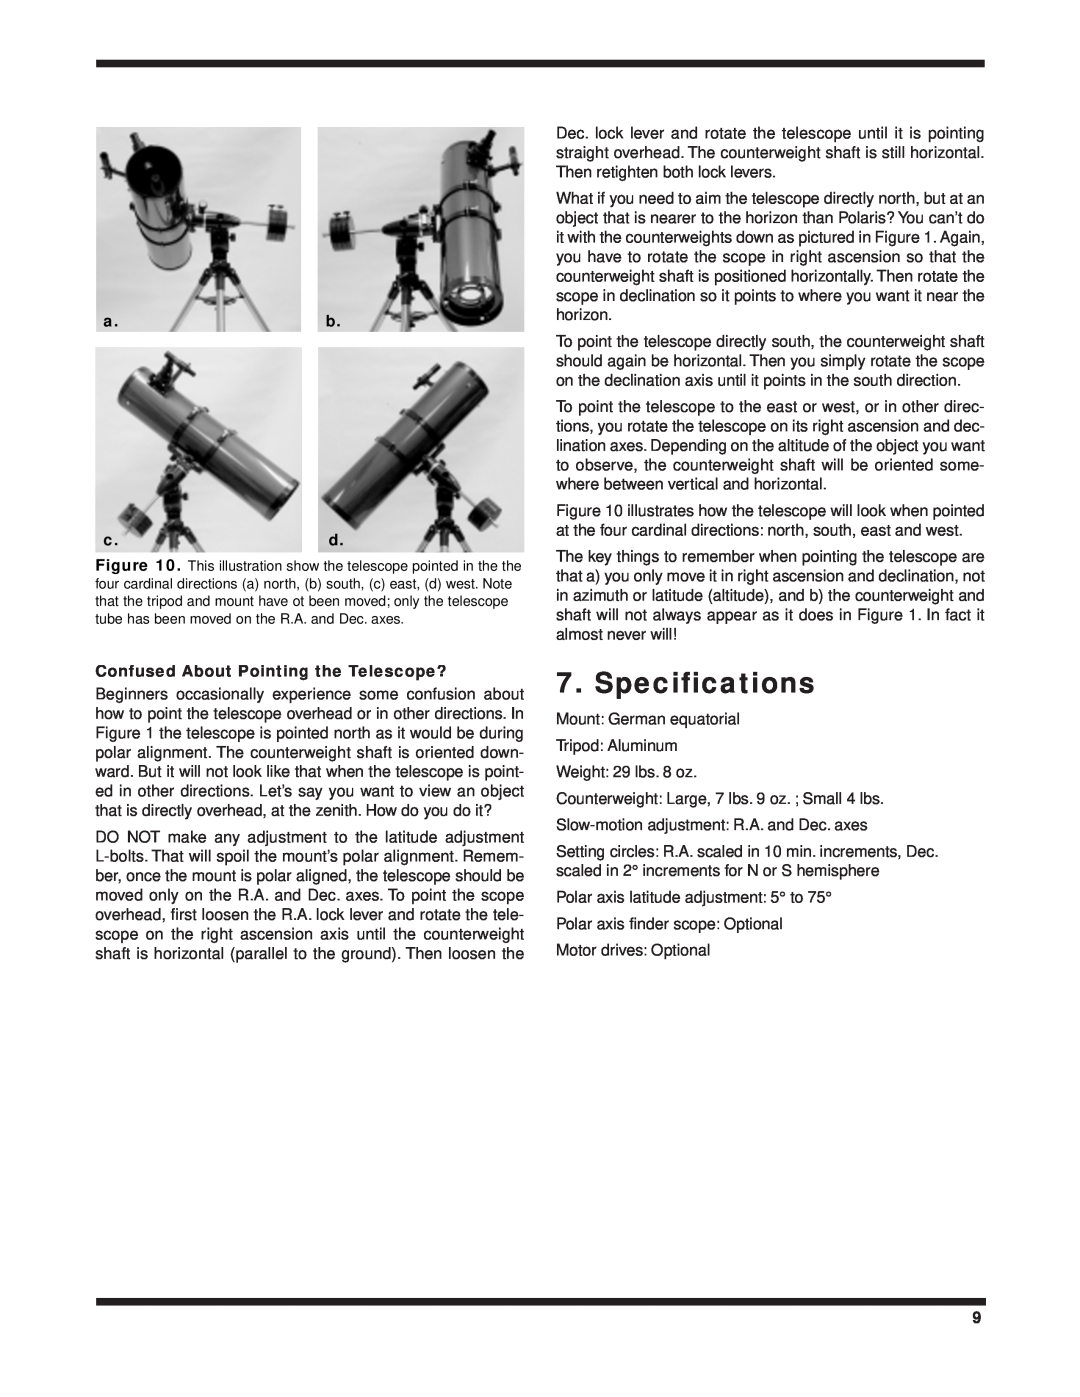 Orion 9829 instruction manual Specifications, a.b c.d, Confused About Pointing the Telescope? 